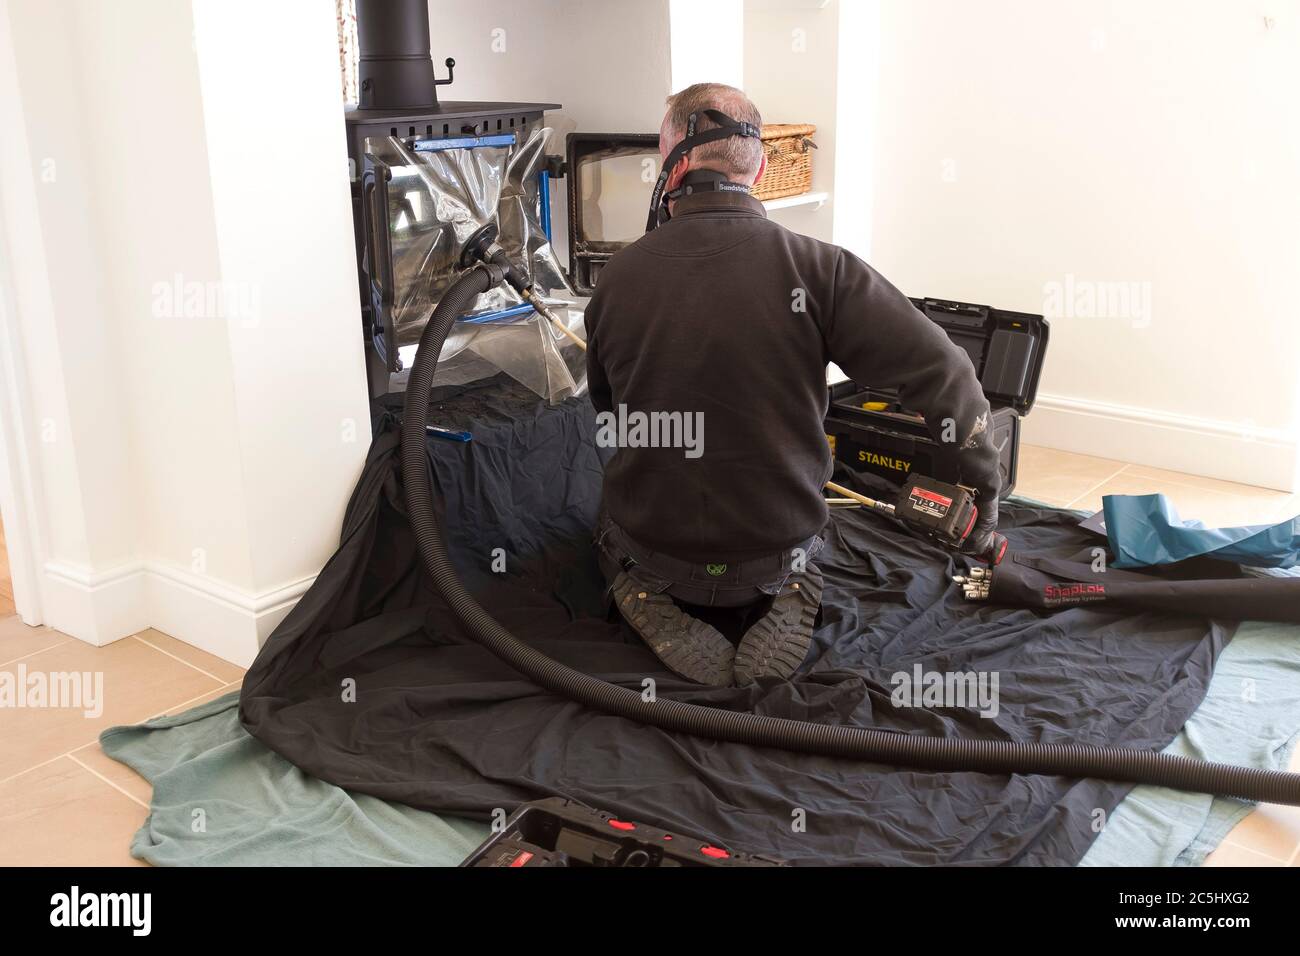 BUCKINGHAM, UK - April 20, 2020. Modern chimney sweep sweeping chimney with a flue liner in a home, UK Stock Photo